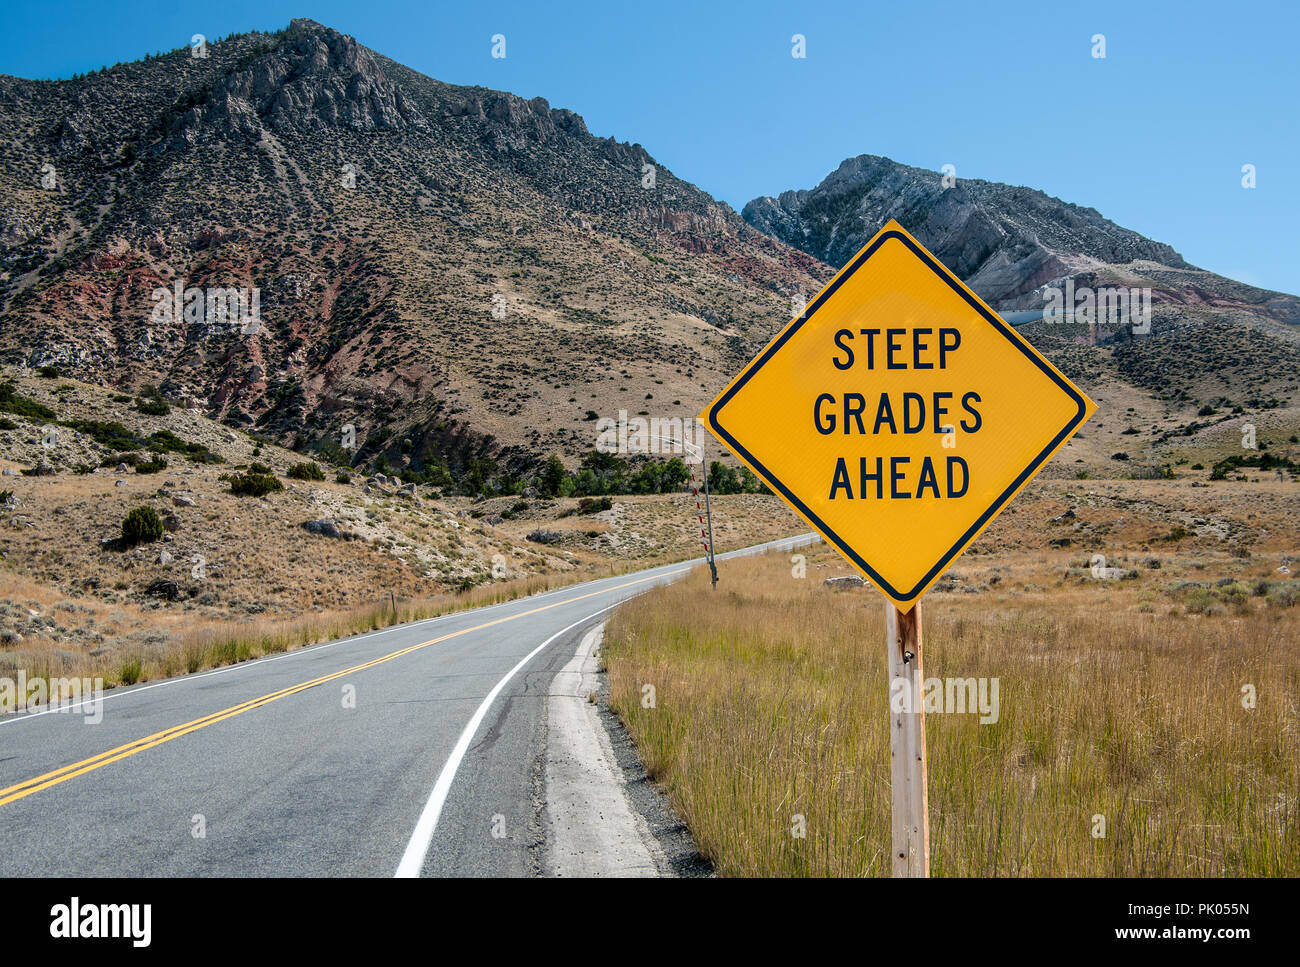 Steep Grades Warning Sign:  A sign warns of a steep climb ahead on a road leading into the Big Horn Mountains of northeastern Wyoming. Stock Photo